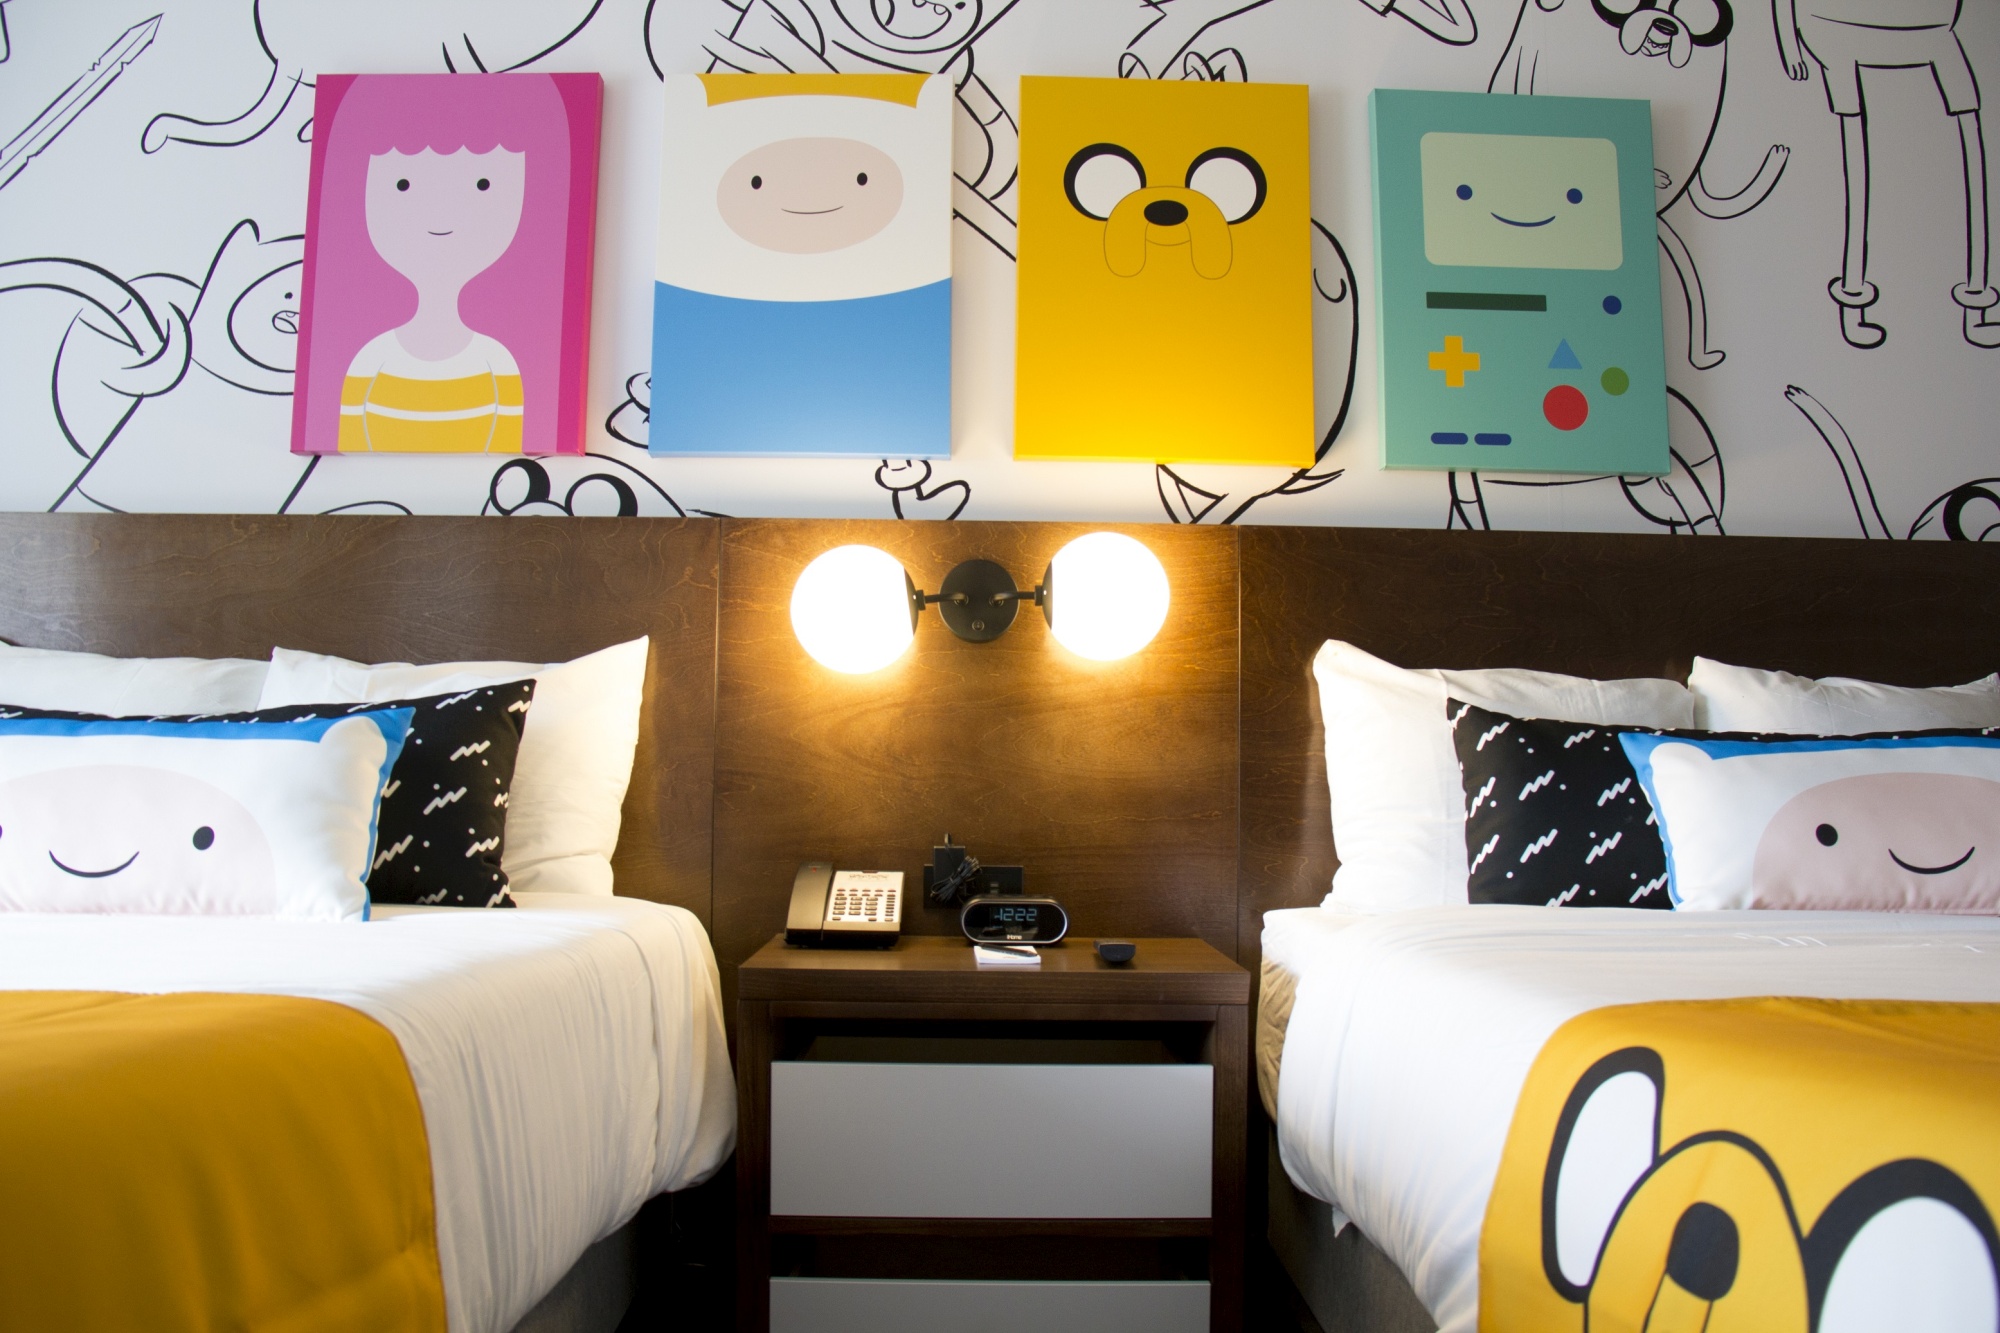 Cartoon Network to open animation-themed hotel in Lancaster